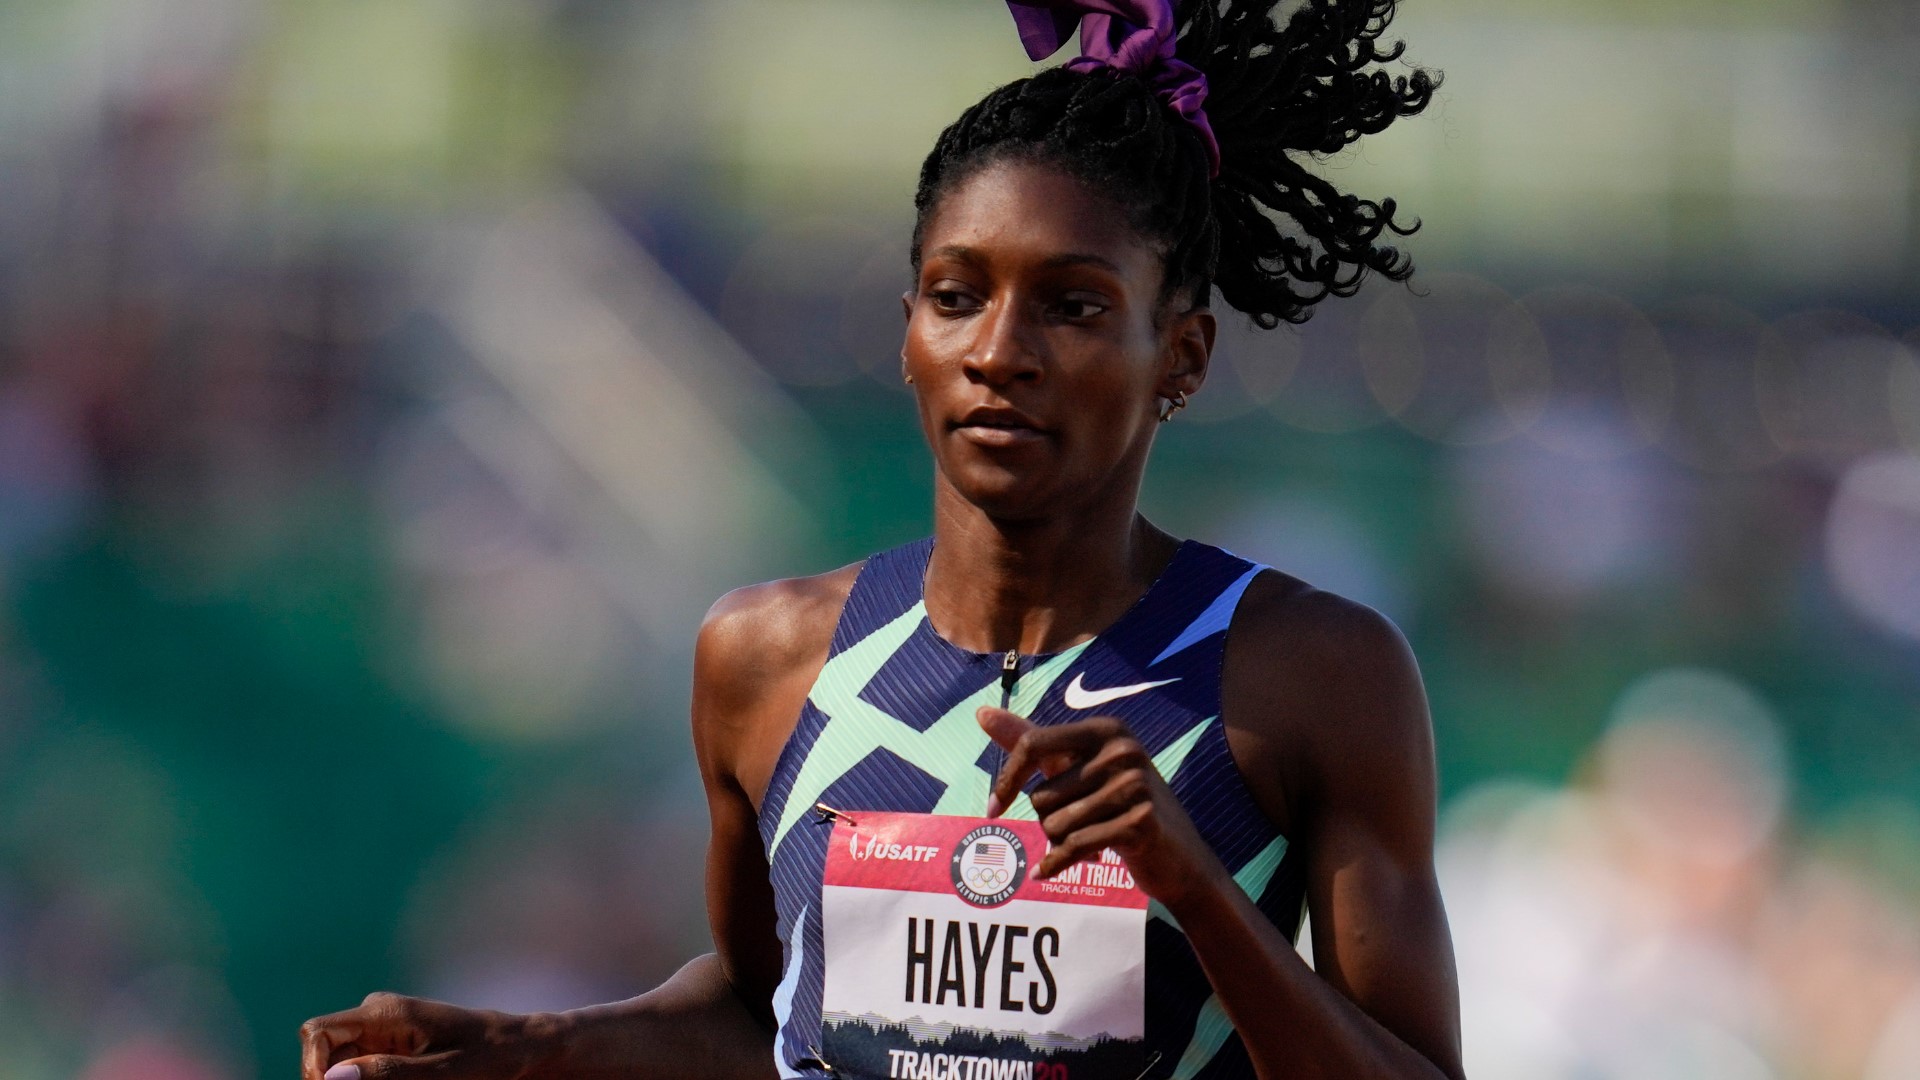 Quanera Hayes, 29, is from Hope Mills, North Carolina, and will be representing Team USA in the Tokyo Olympics. Hayes will compete in the 400m sprint.